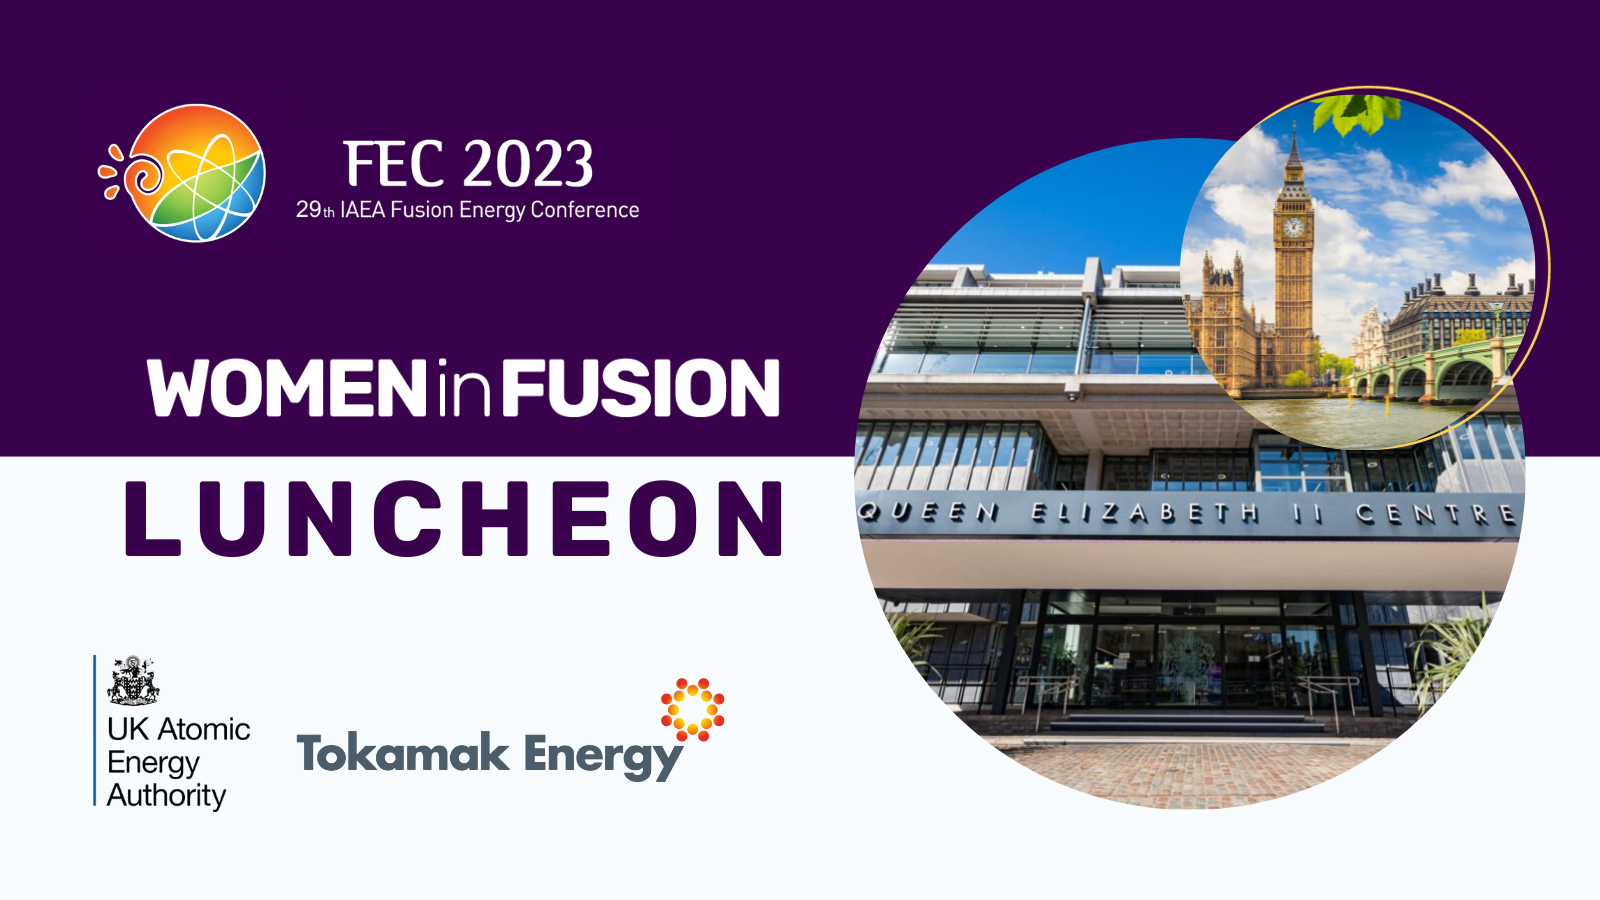 Women in Fusion Lunch at FEC 2023 Conference